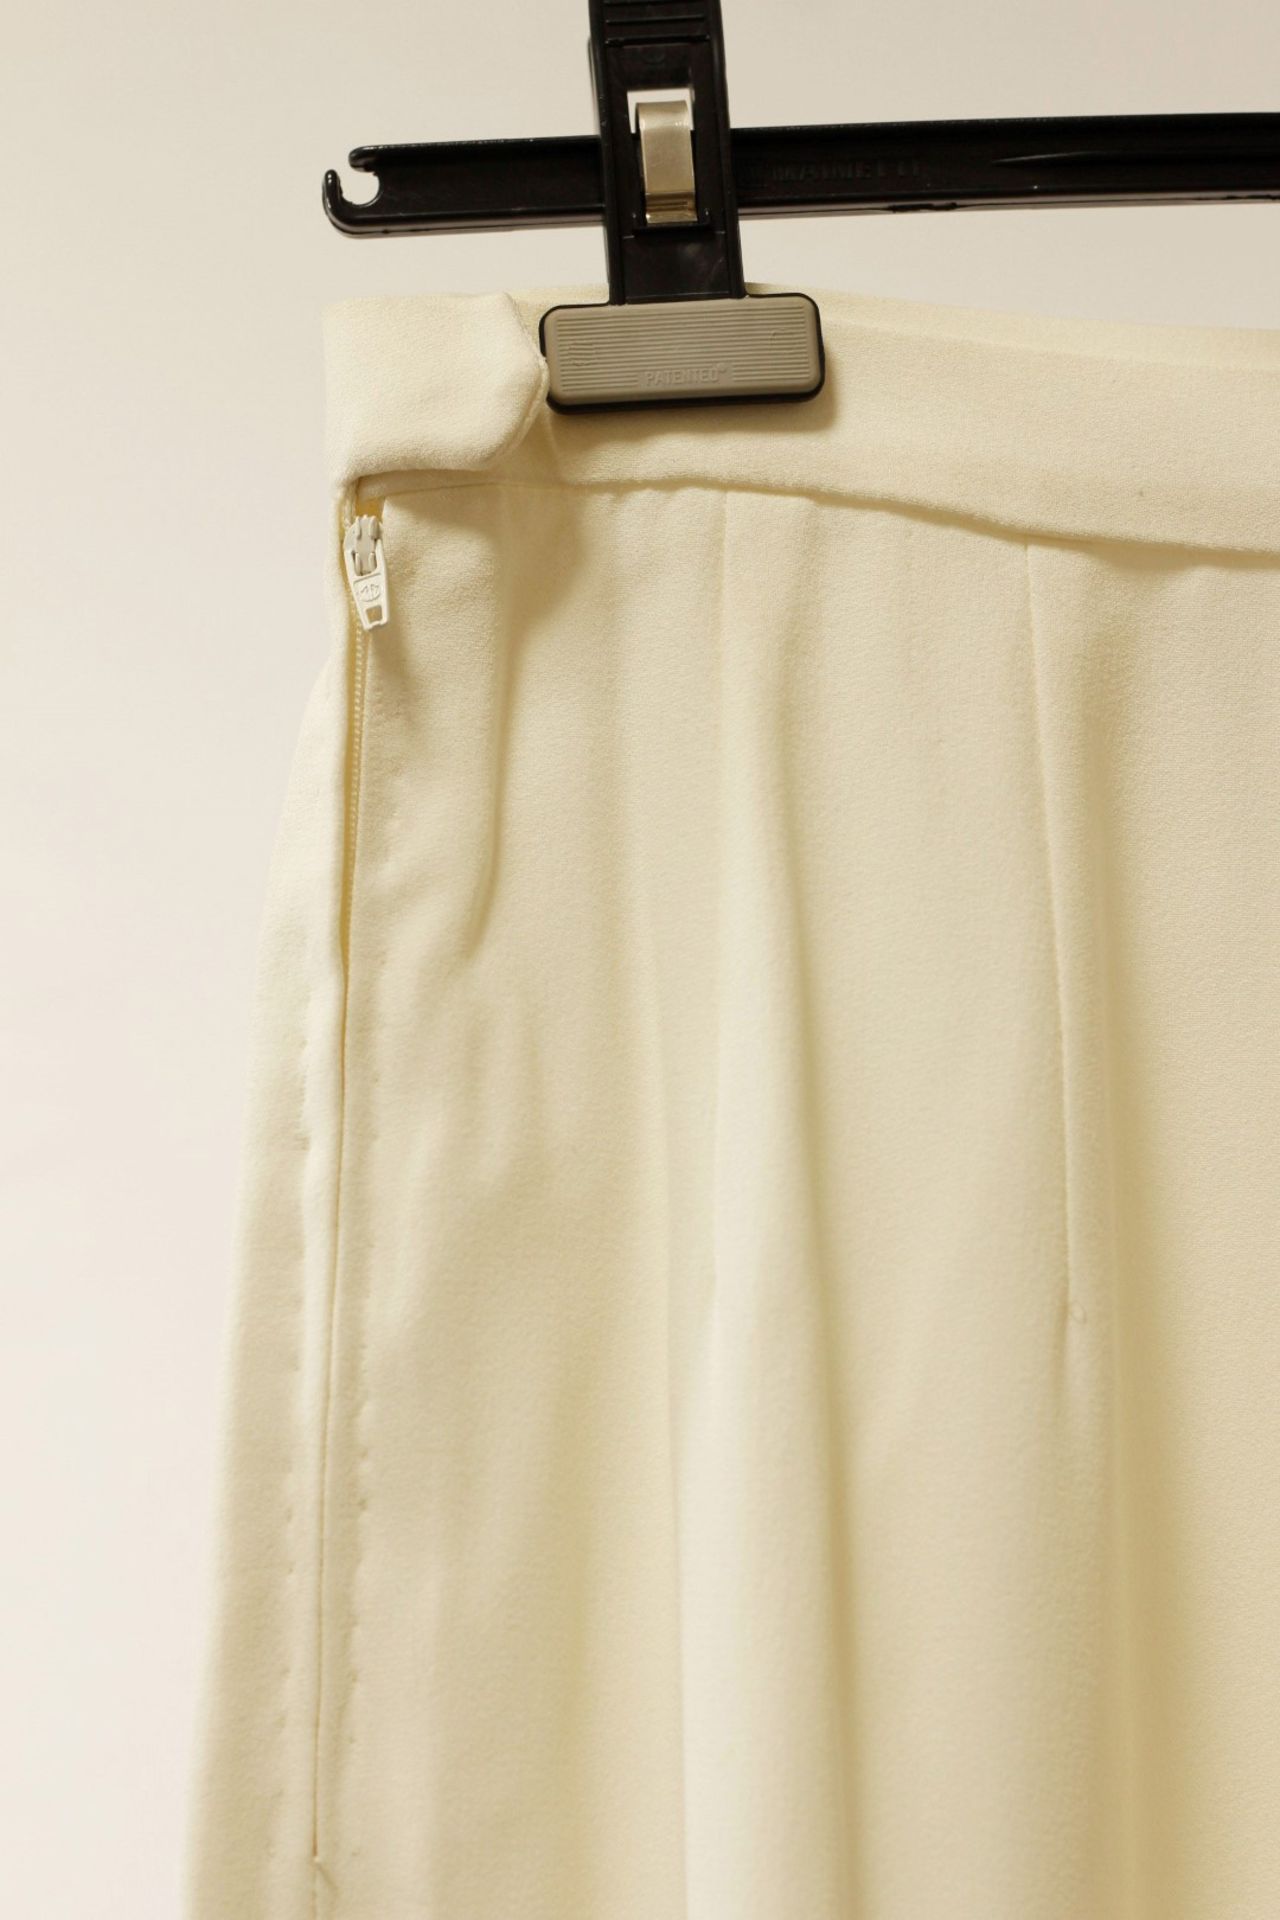 1 x Boutique Le Duc Cream Suit (Jacket And Trousers) - Size: 12 - Material: 82% Acetate, 18% Viscose - Image 8 of 13